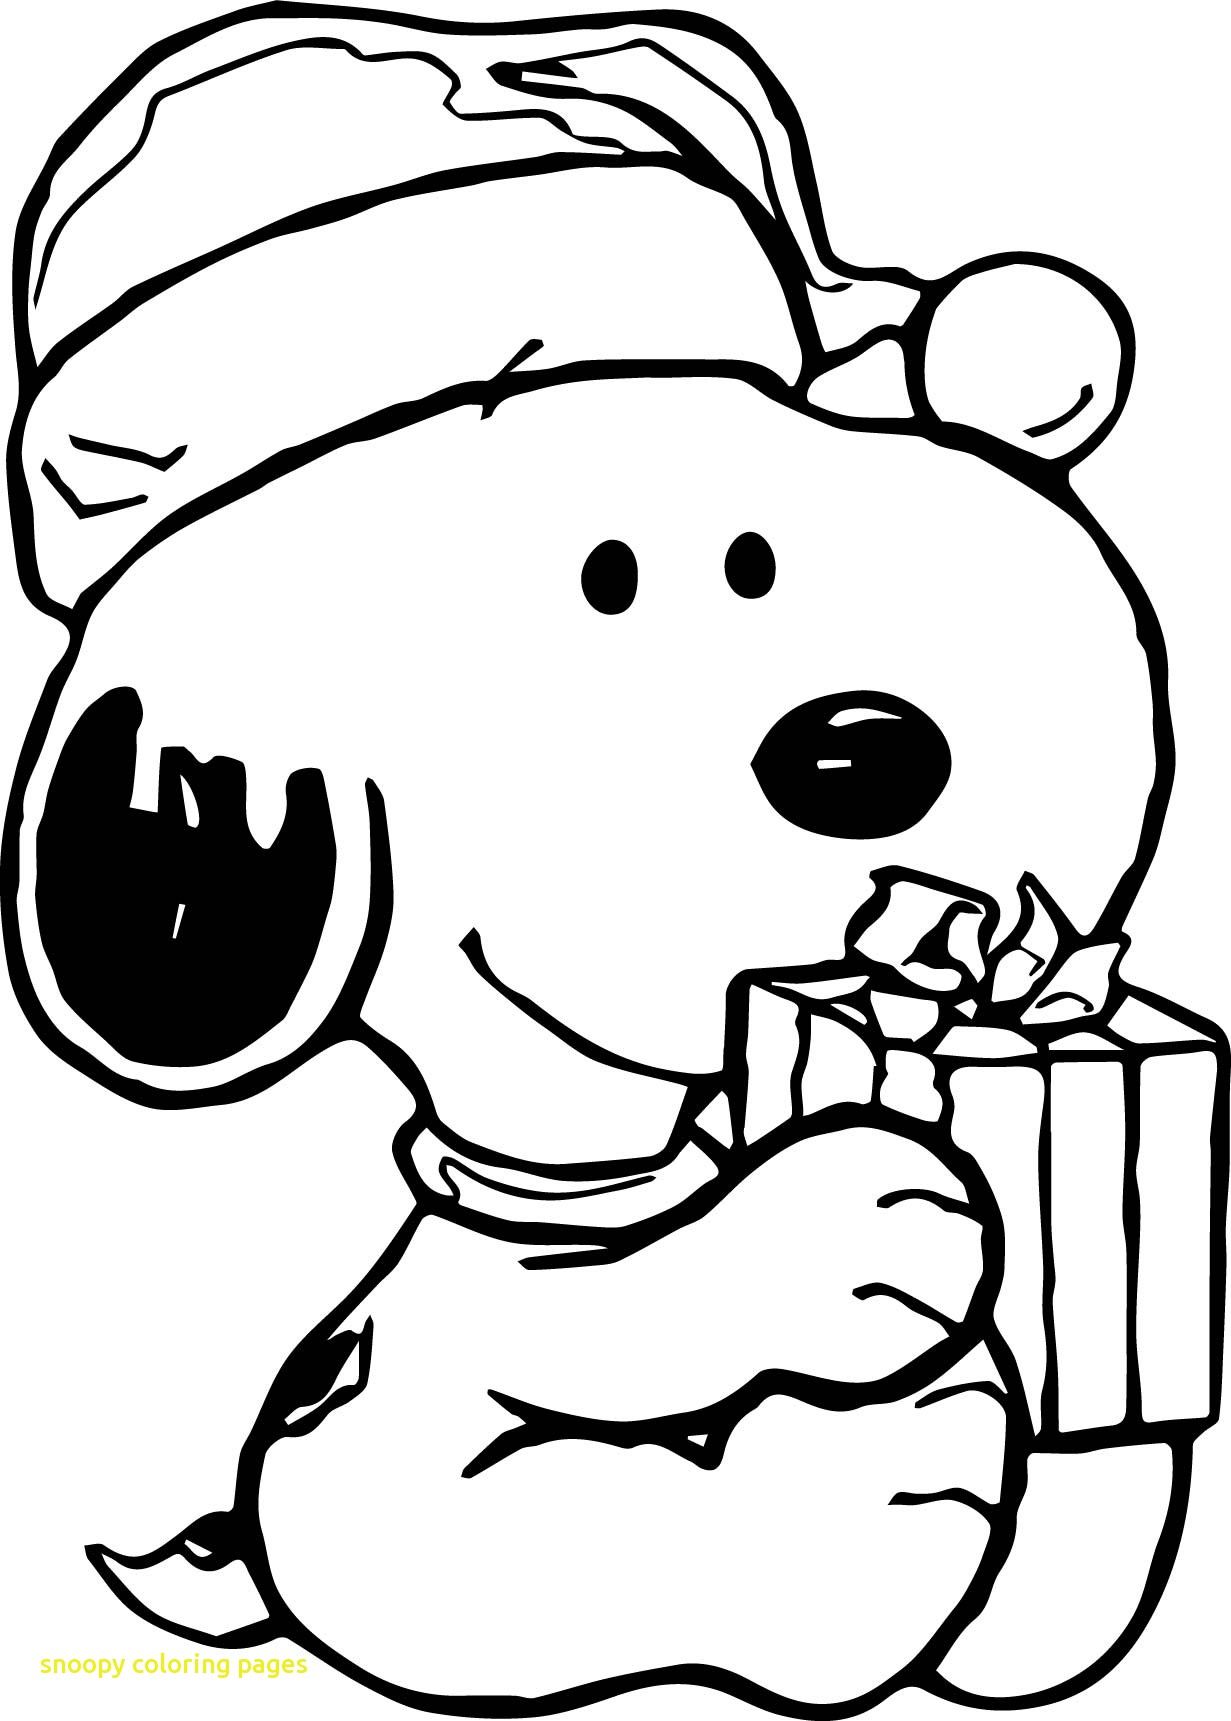 snoopy-birthday-coloring-pages-at-getcolorings-free-printable-colorings-pages-to-print-and